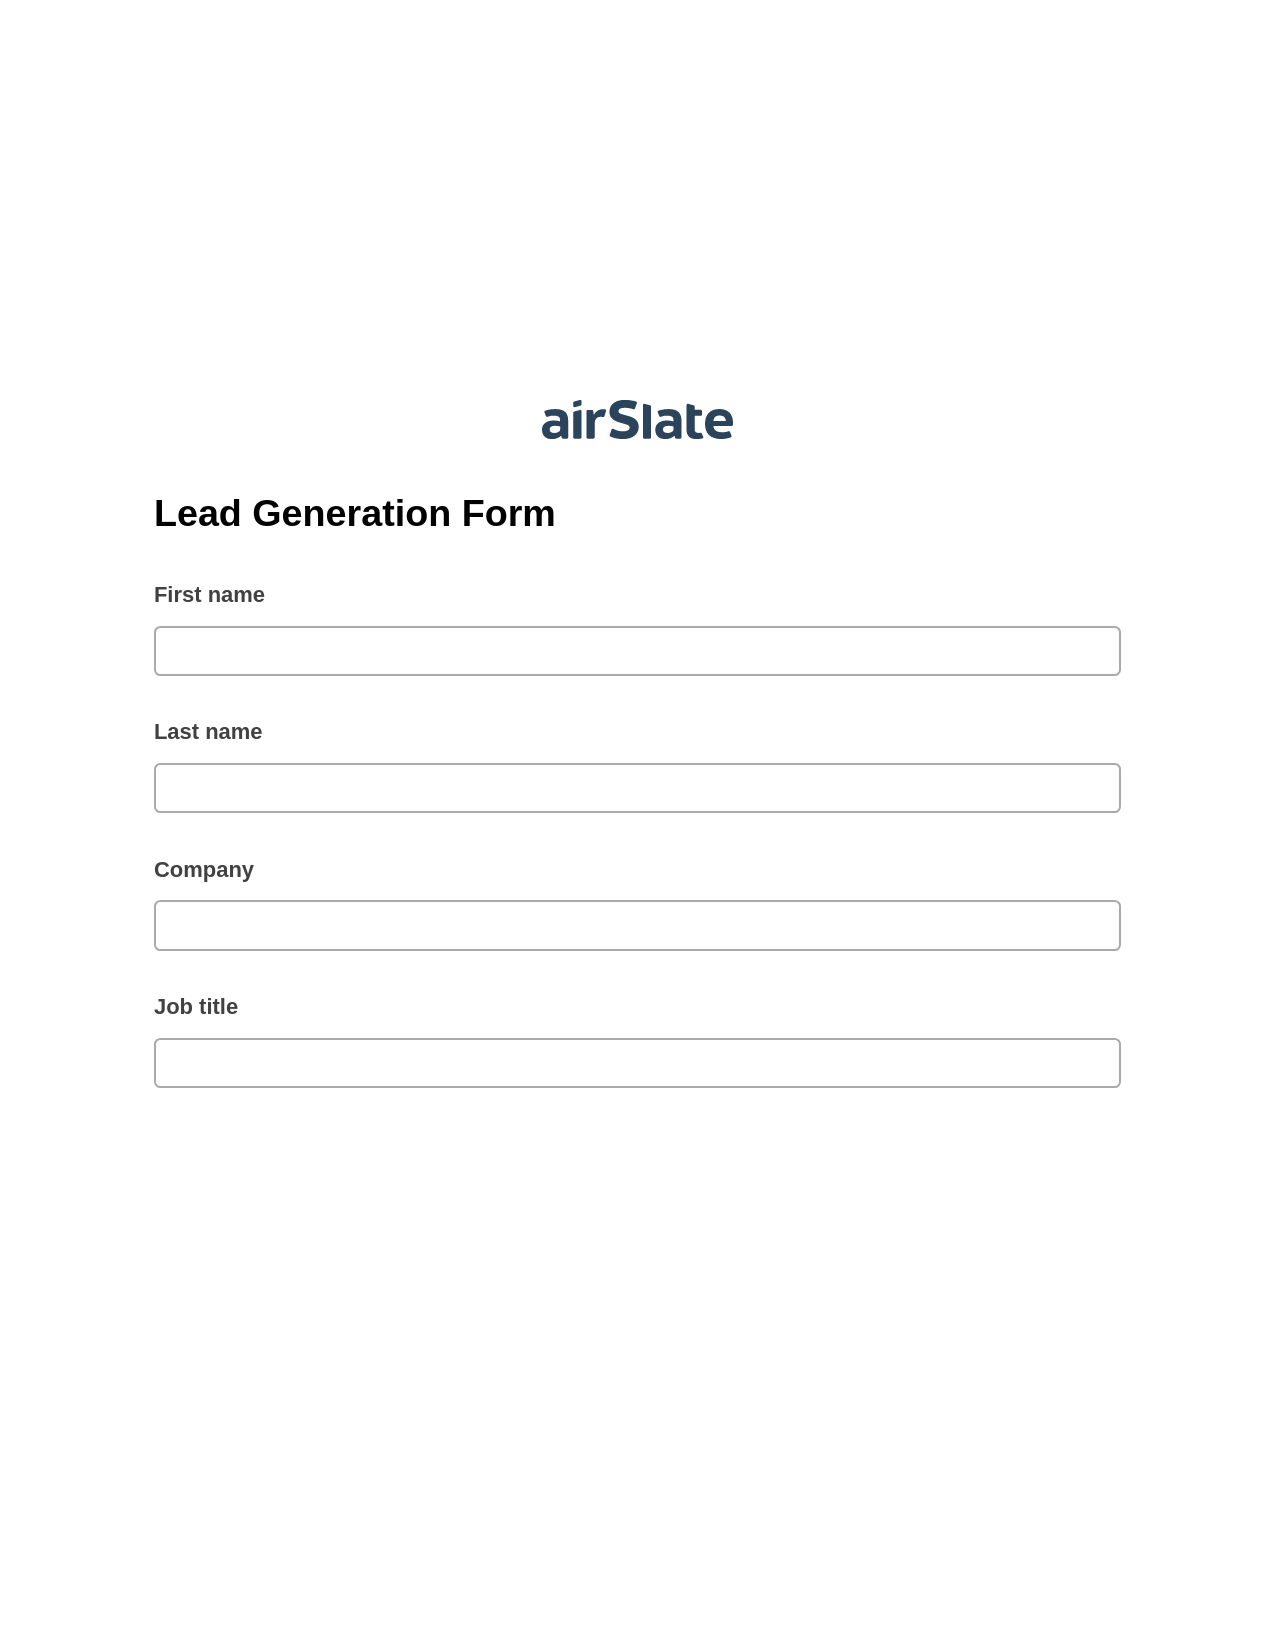 Lead Generation Form Pre-fill from CSV File Bot, Send a Slate to Salesforce Contact Bot, Archive to SharePoint Folder Bot